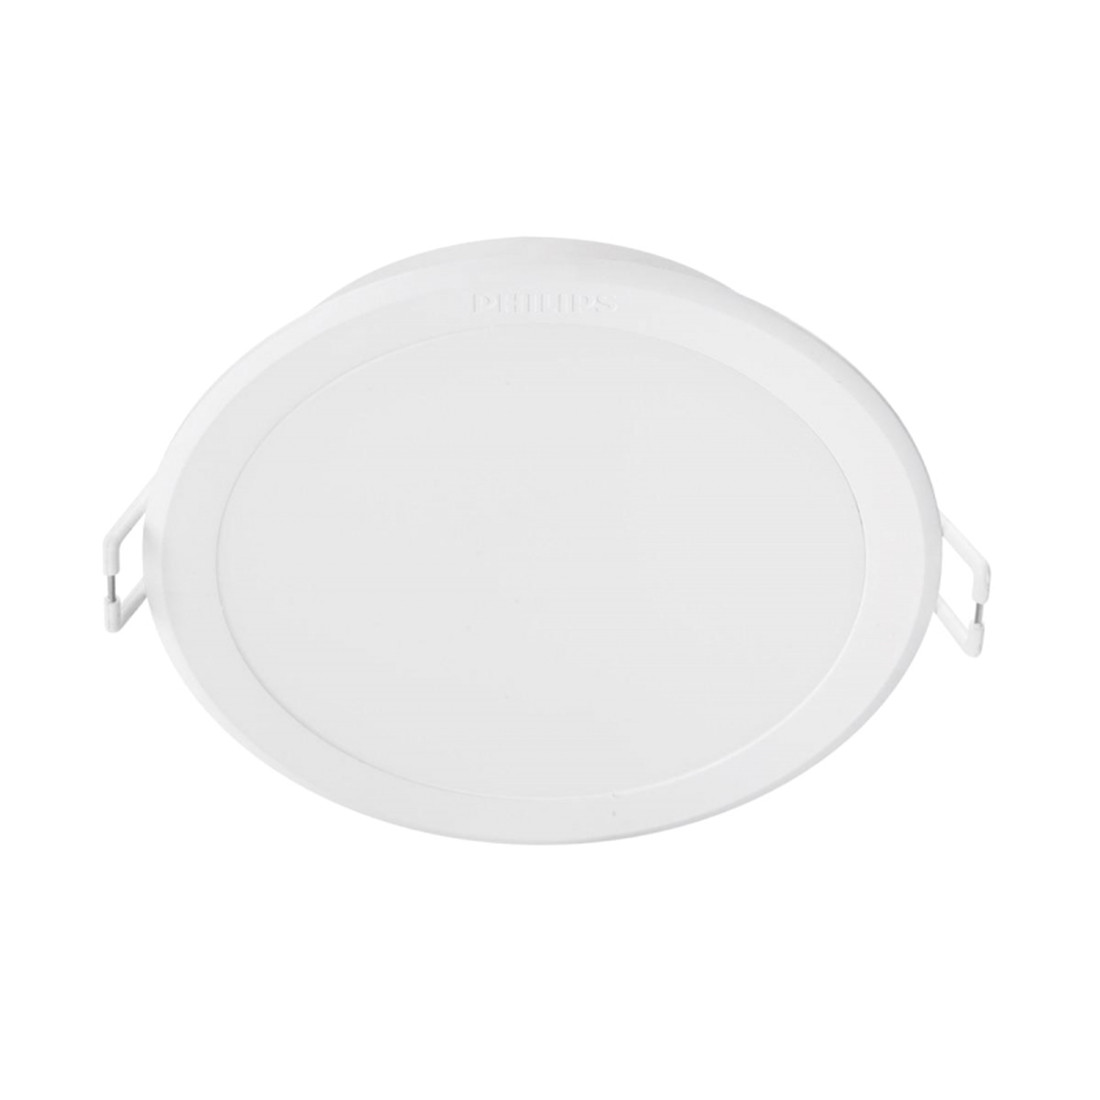 Светильник Philips 59464 MESON 125 13W 40K WH recessed LED 2-014561 915005748101